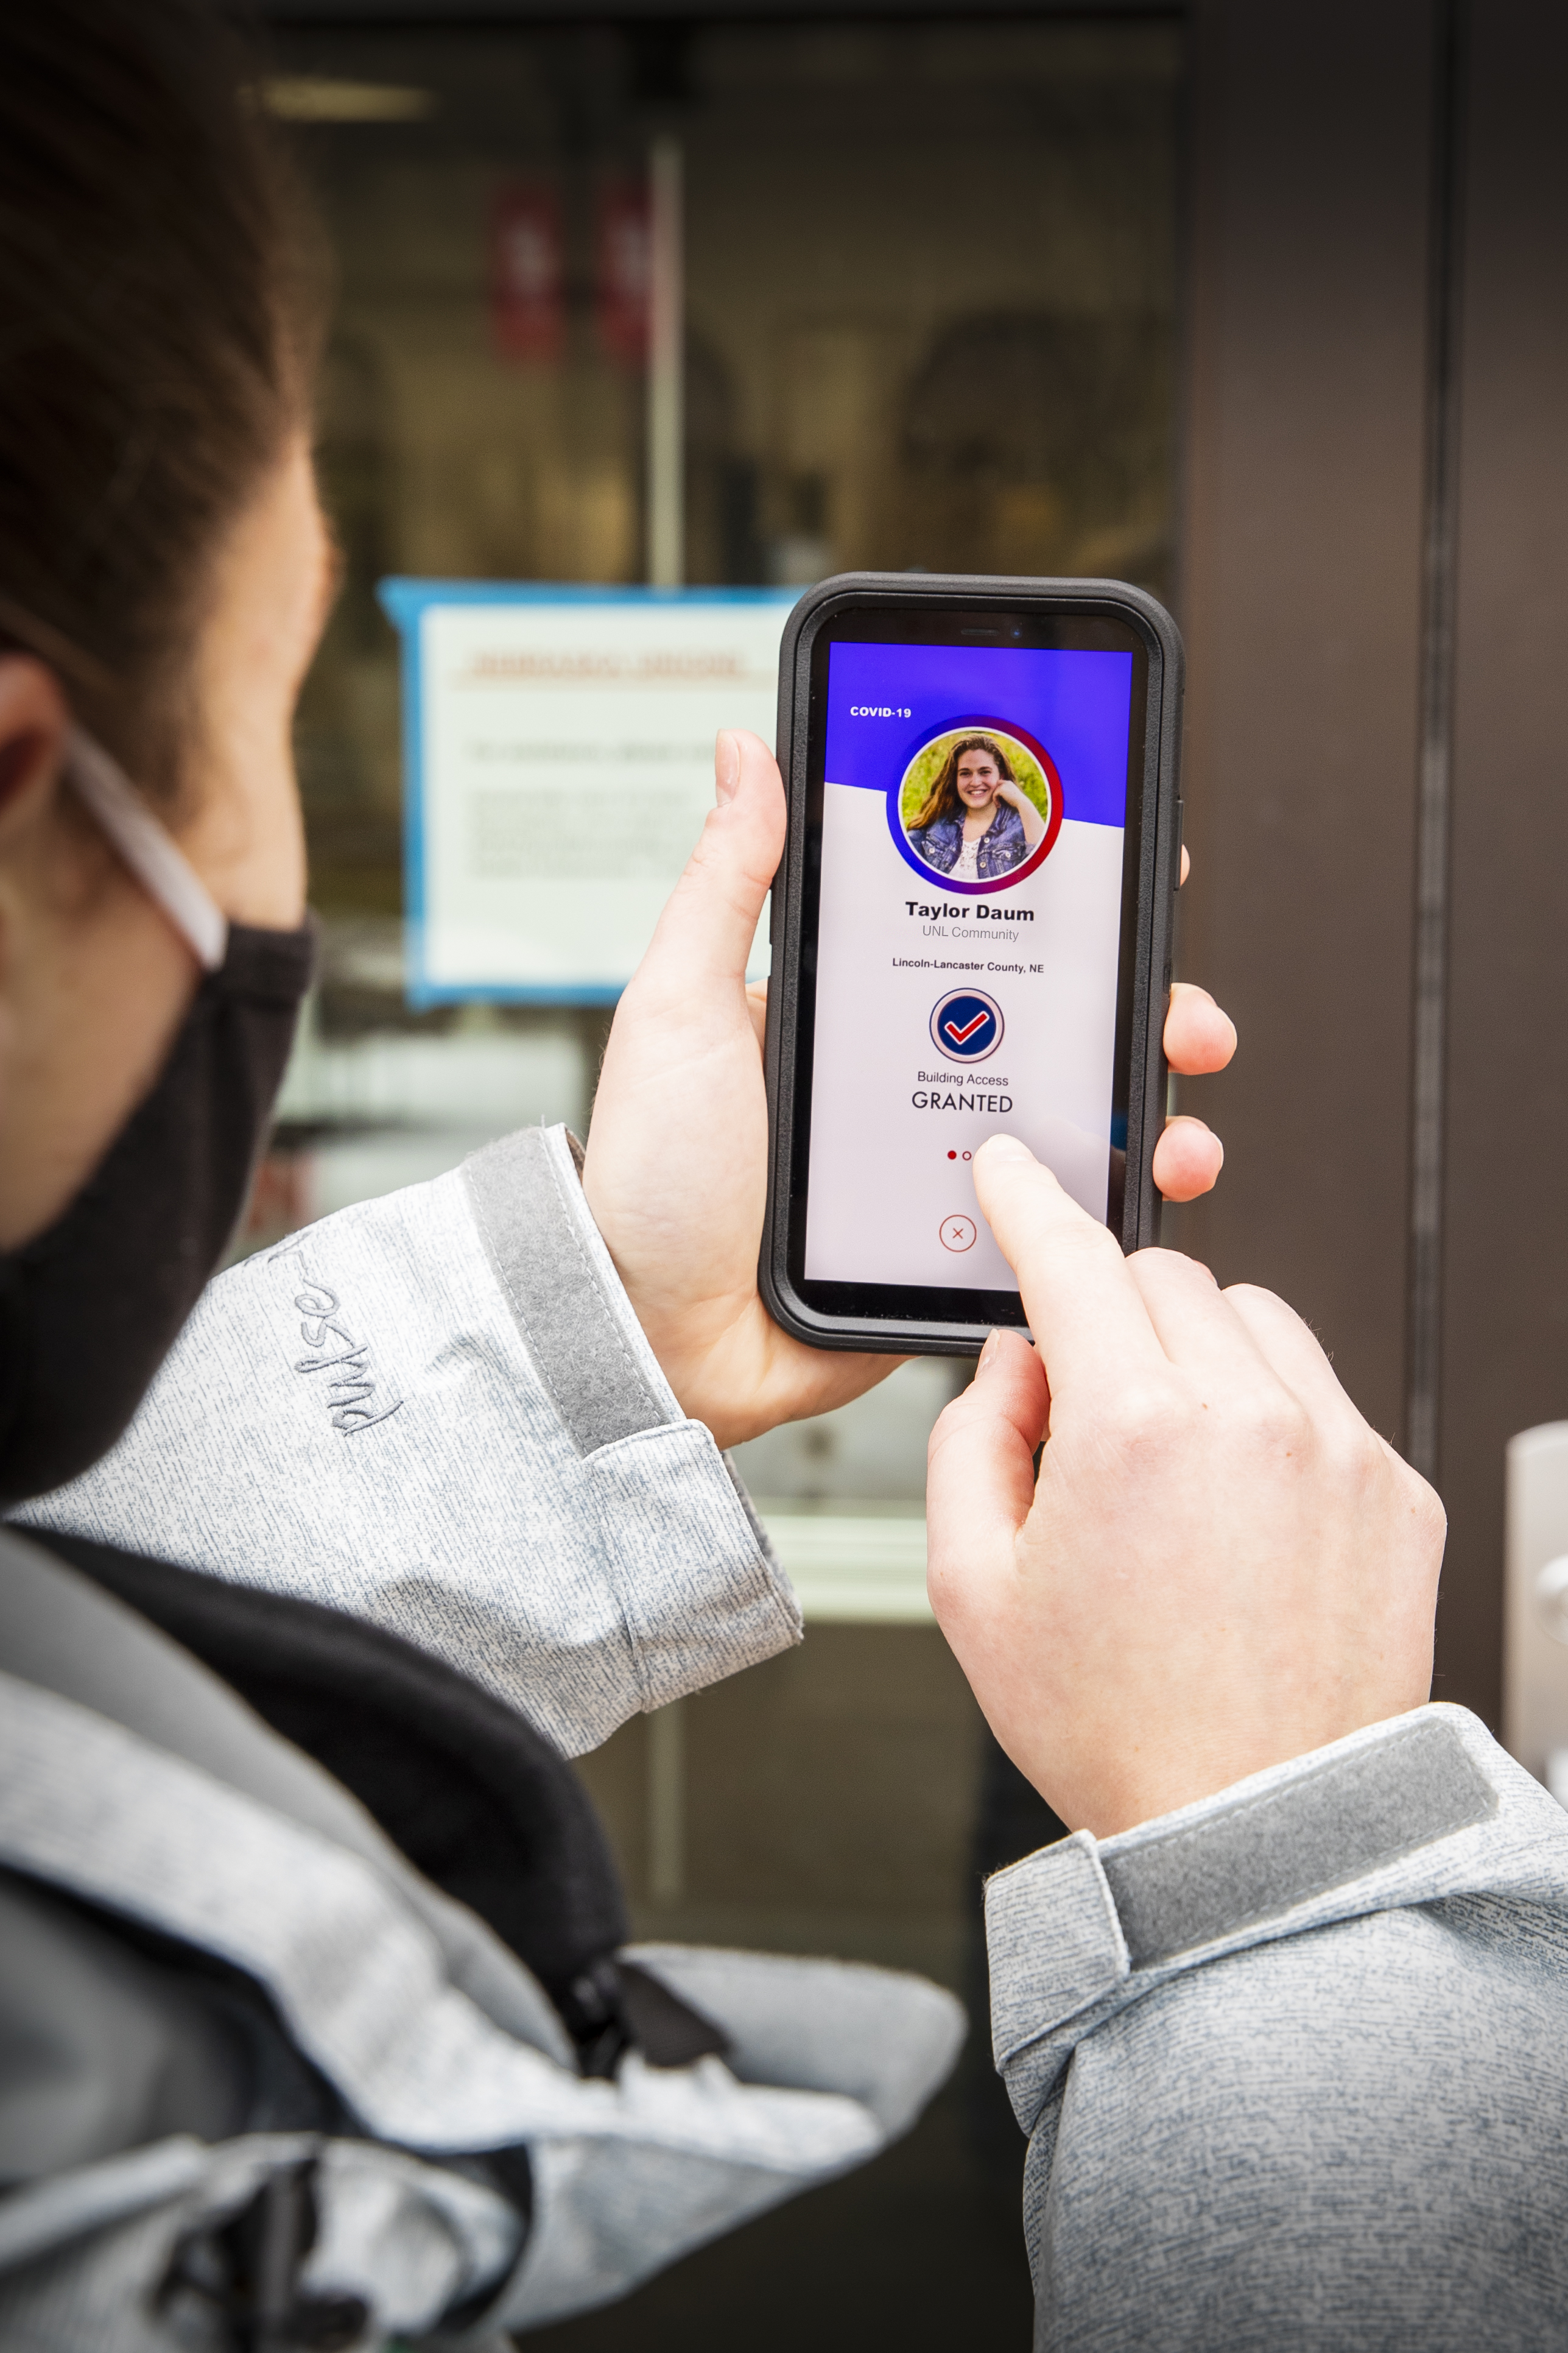 The Safer Nebraska app can be used to schedule your COVID test on campus. [photo by Craig Chandler | University Communication]